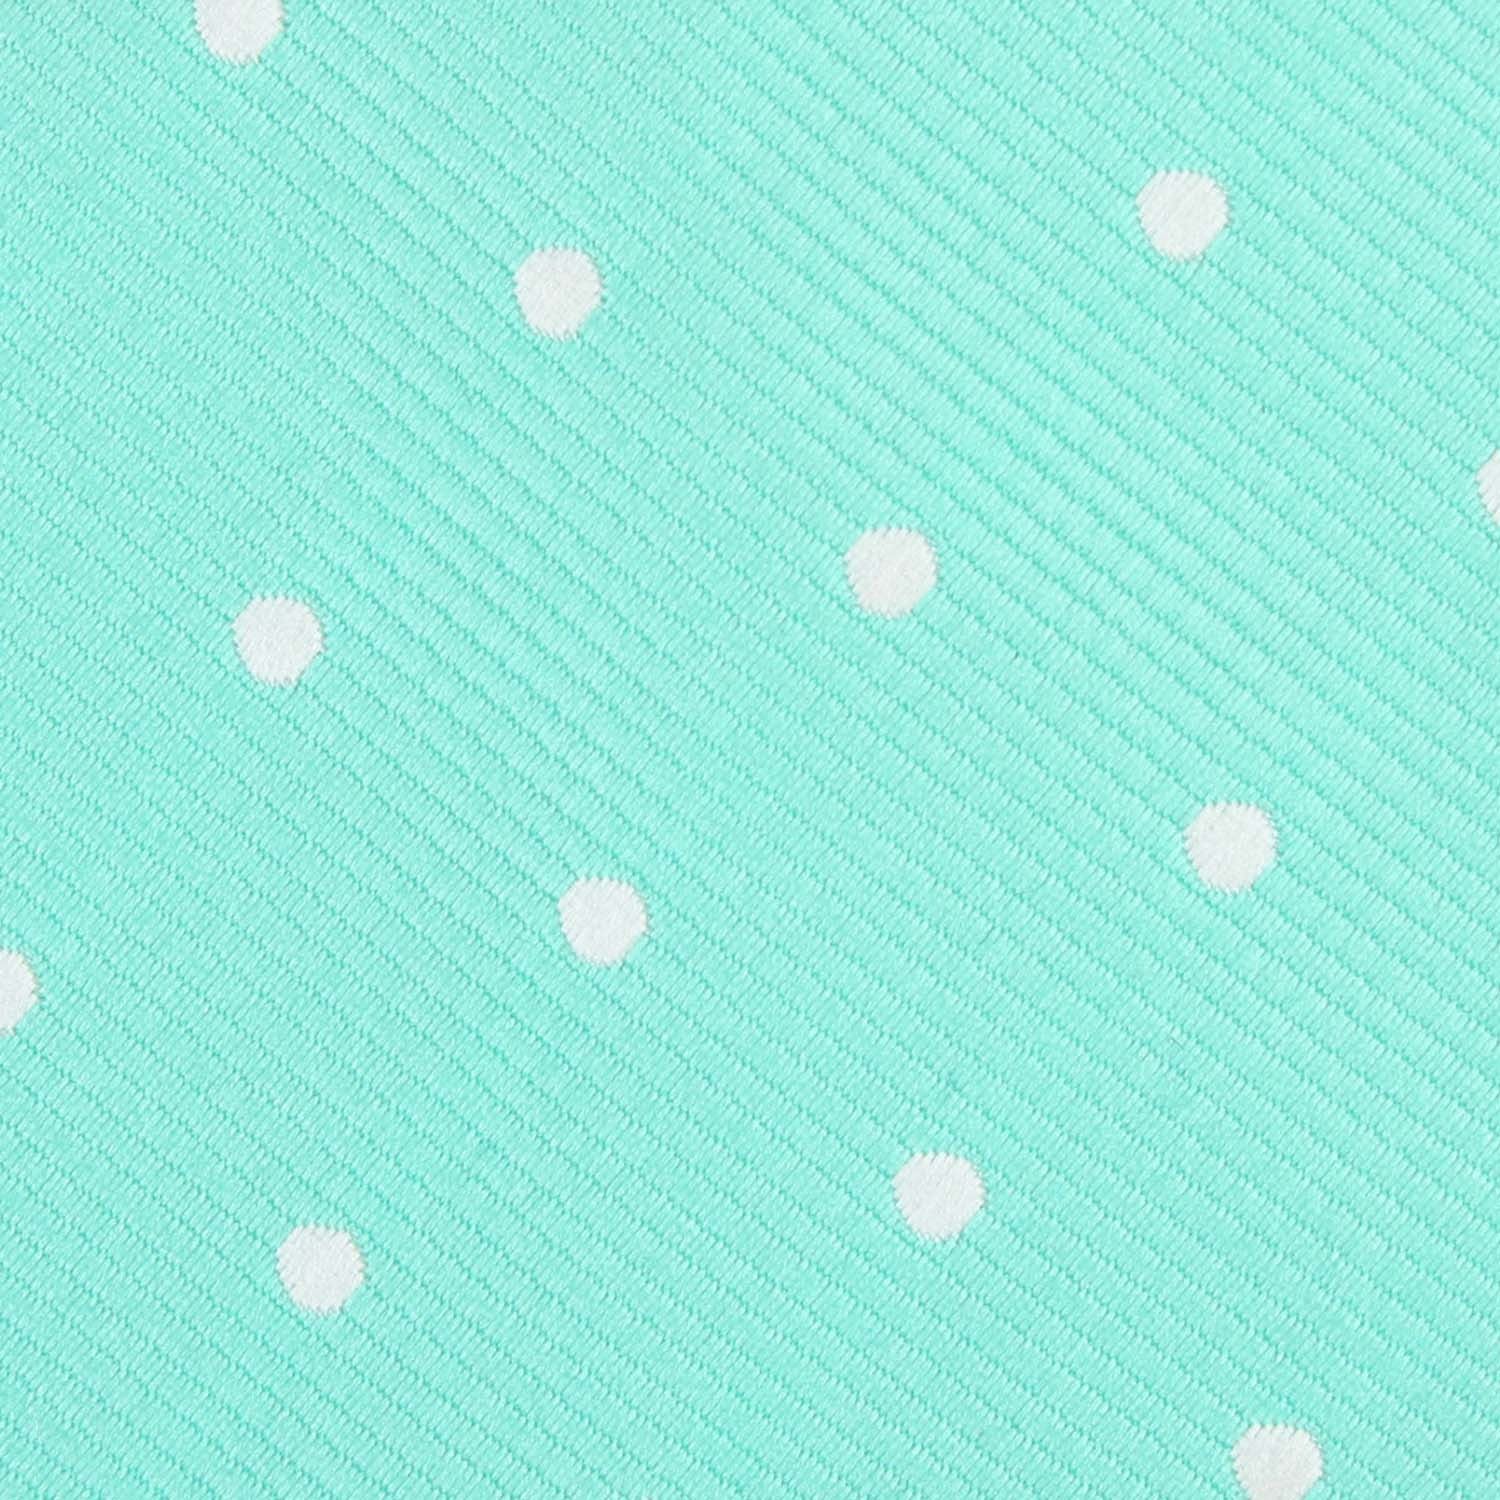 Seafoam Green with White Polka Dots Fabric Bow Tie M138